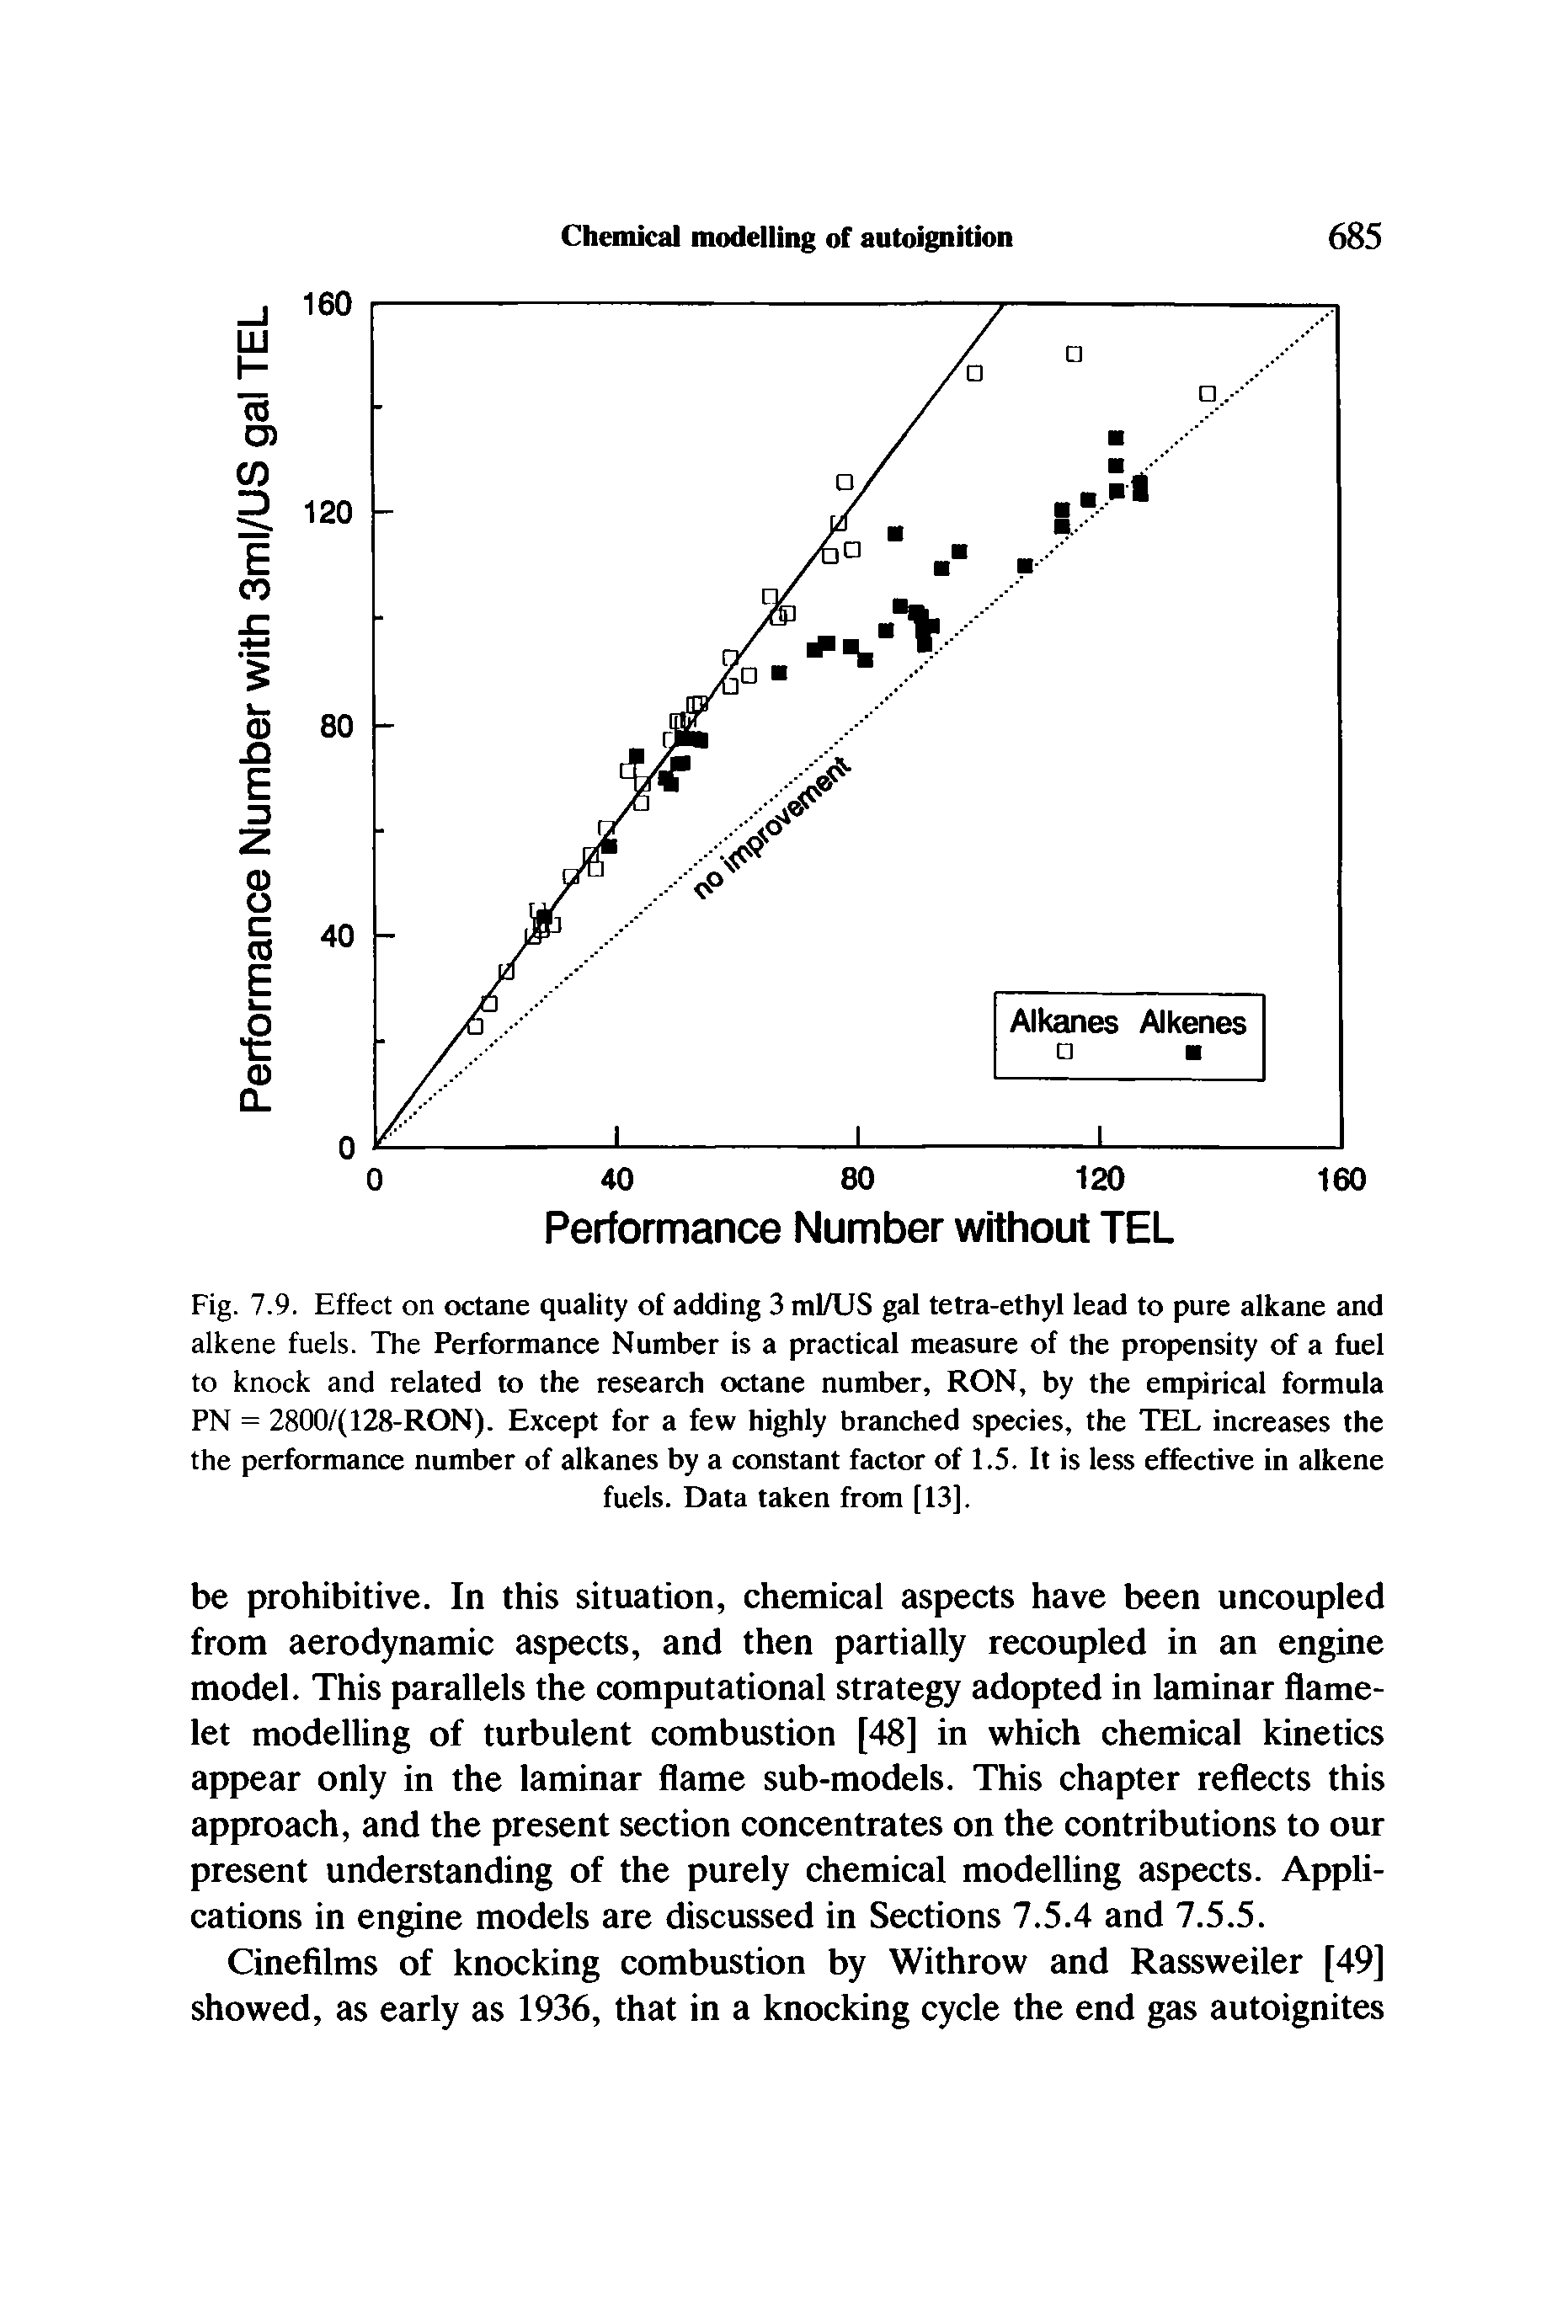 Fig. 7.9. Effect on octane quality of adding 3 ml/US gal tetra-ethyl lead to pure alkane and alkene fuels. The Performance Number is a practical measure of the propensity of a fuel to knock and related to the research octane number, RON, by the empirical formula PN = 2800/(128-RON). Except for a few highly branched species, the TEL increases the the performance number of alkanes by a constant factor of 1.5. It is less effective in alkene...